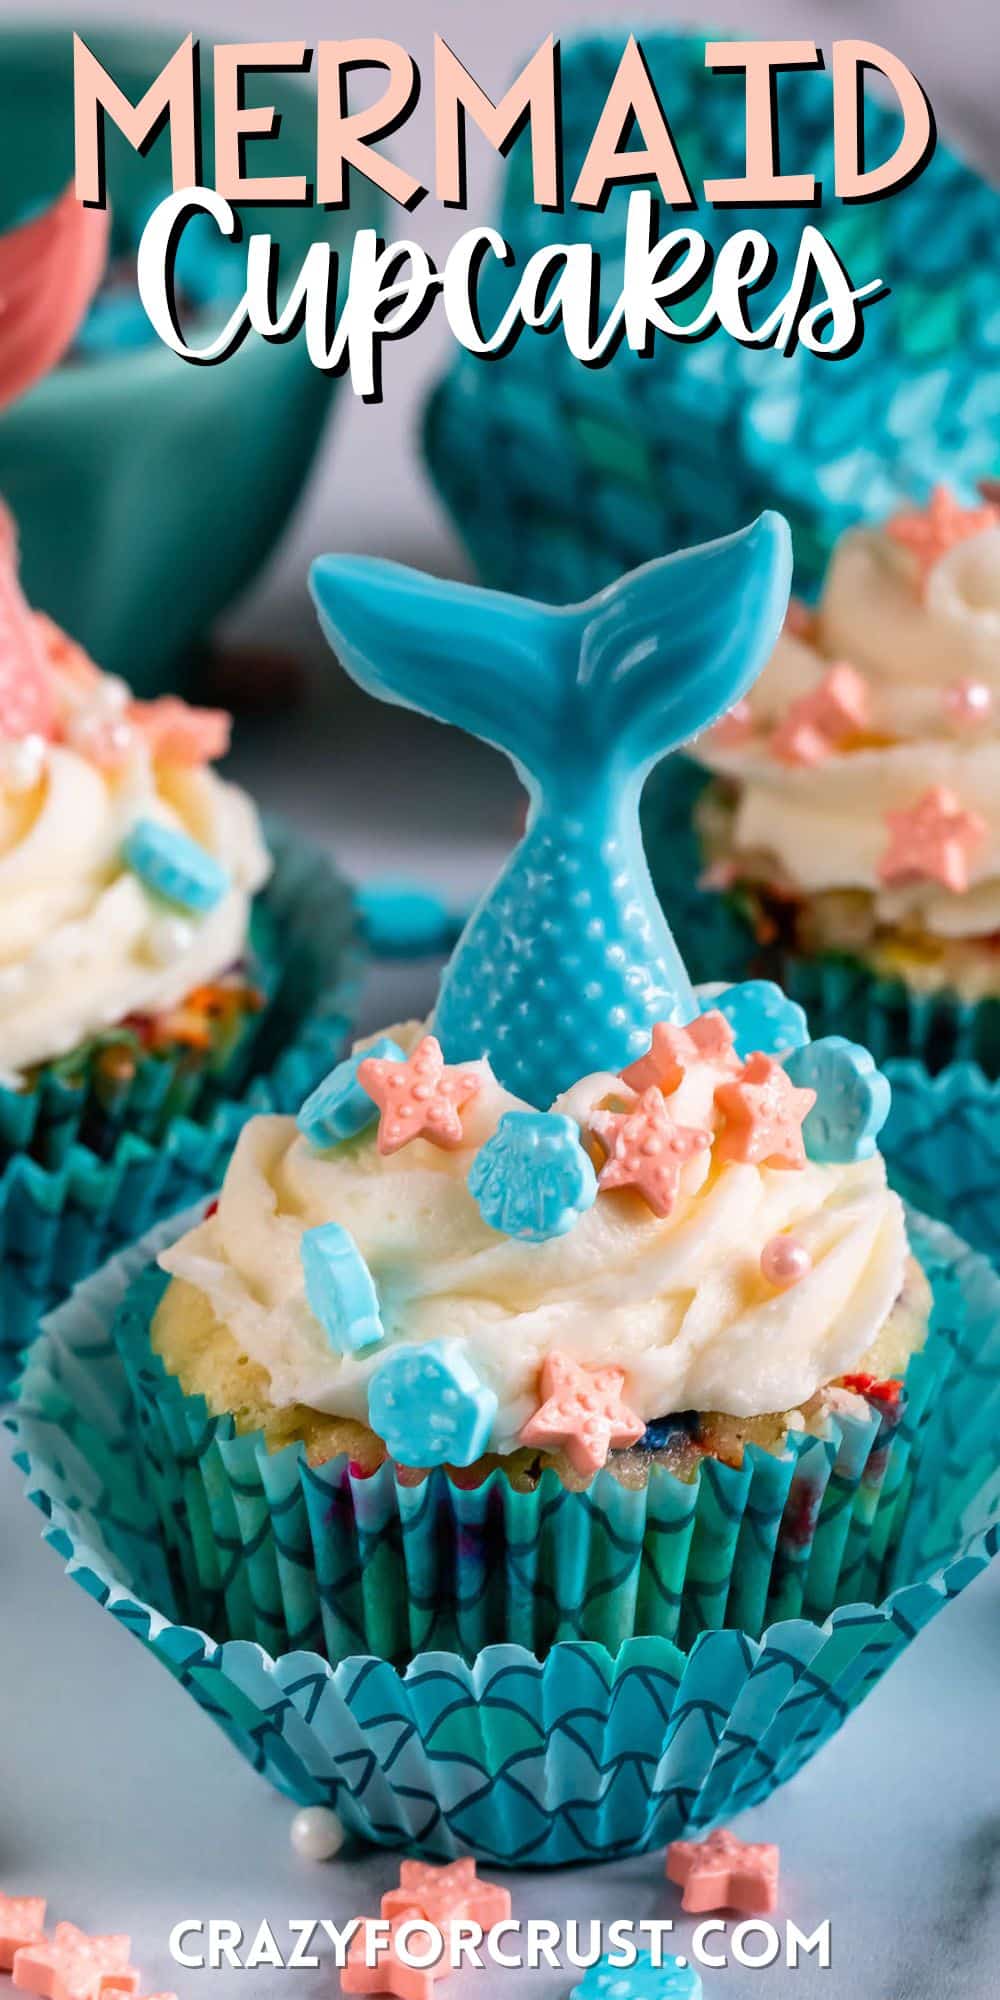 cupcakes in scaled cupcake wrappers with candy mermaid tails on top with words on the image.